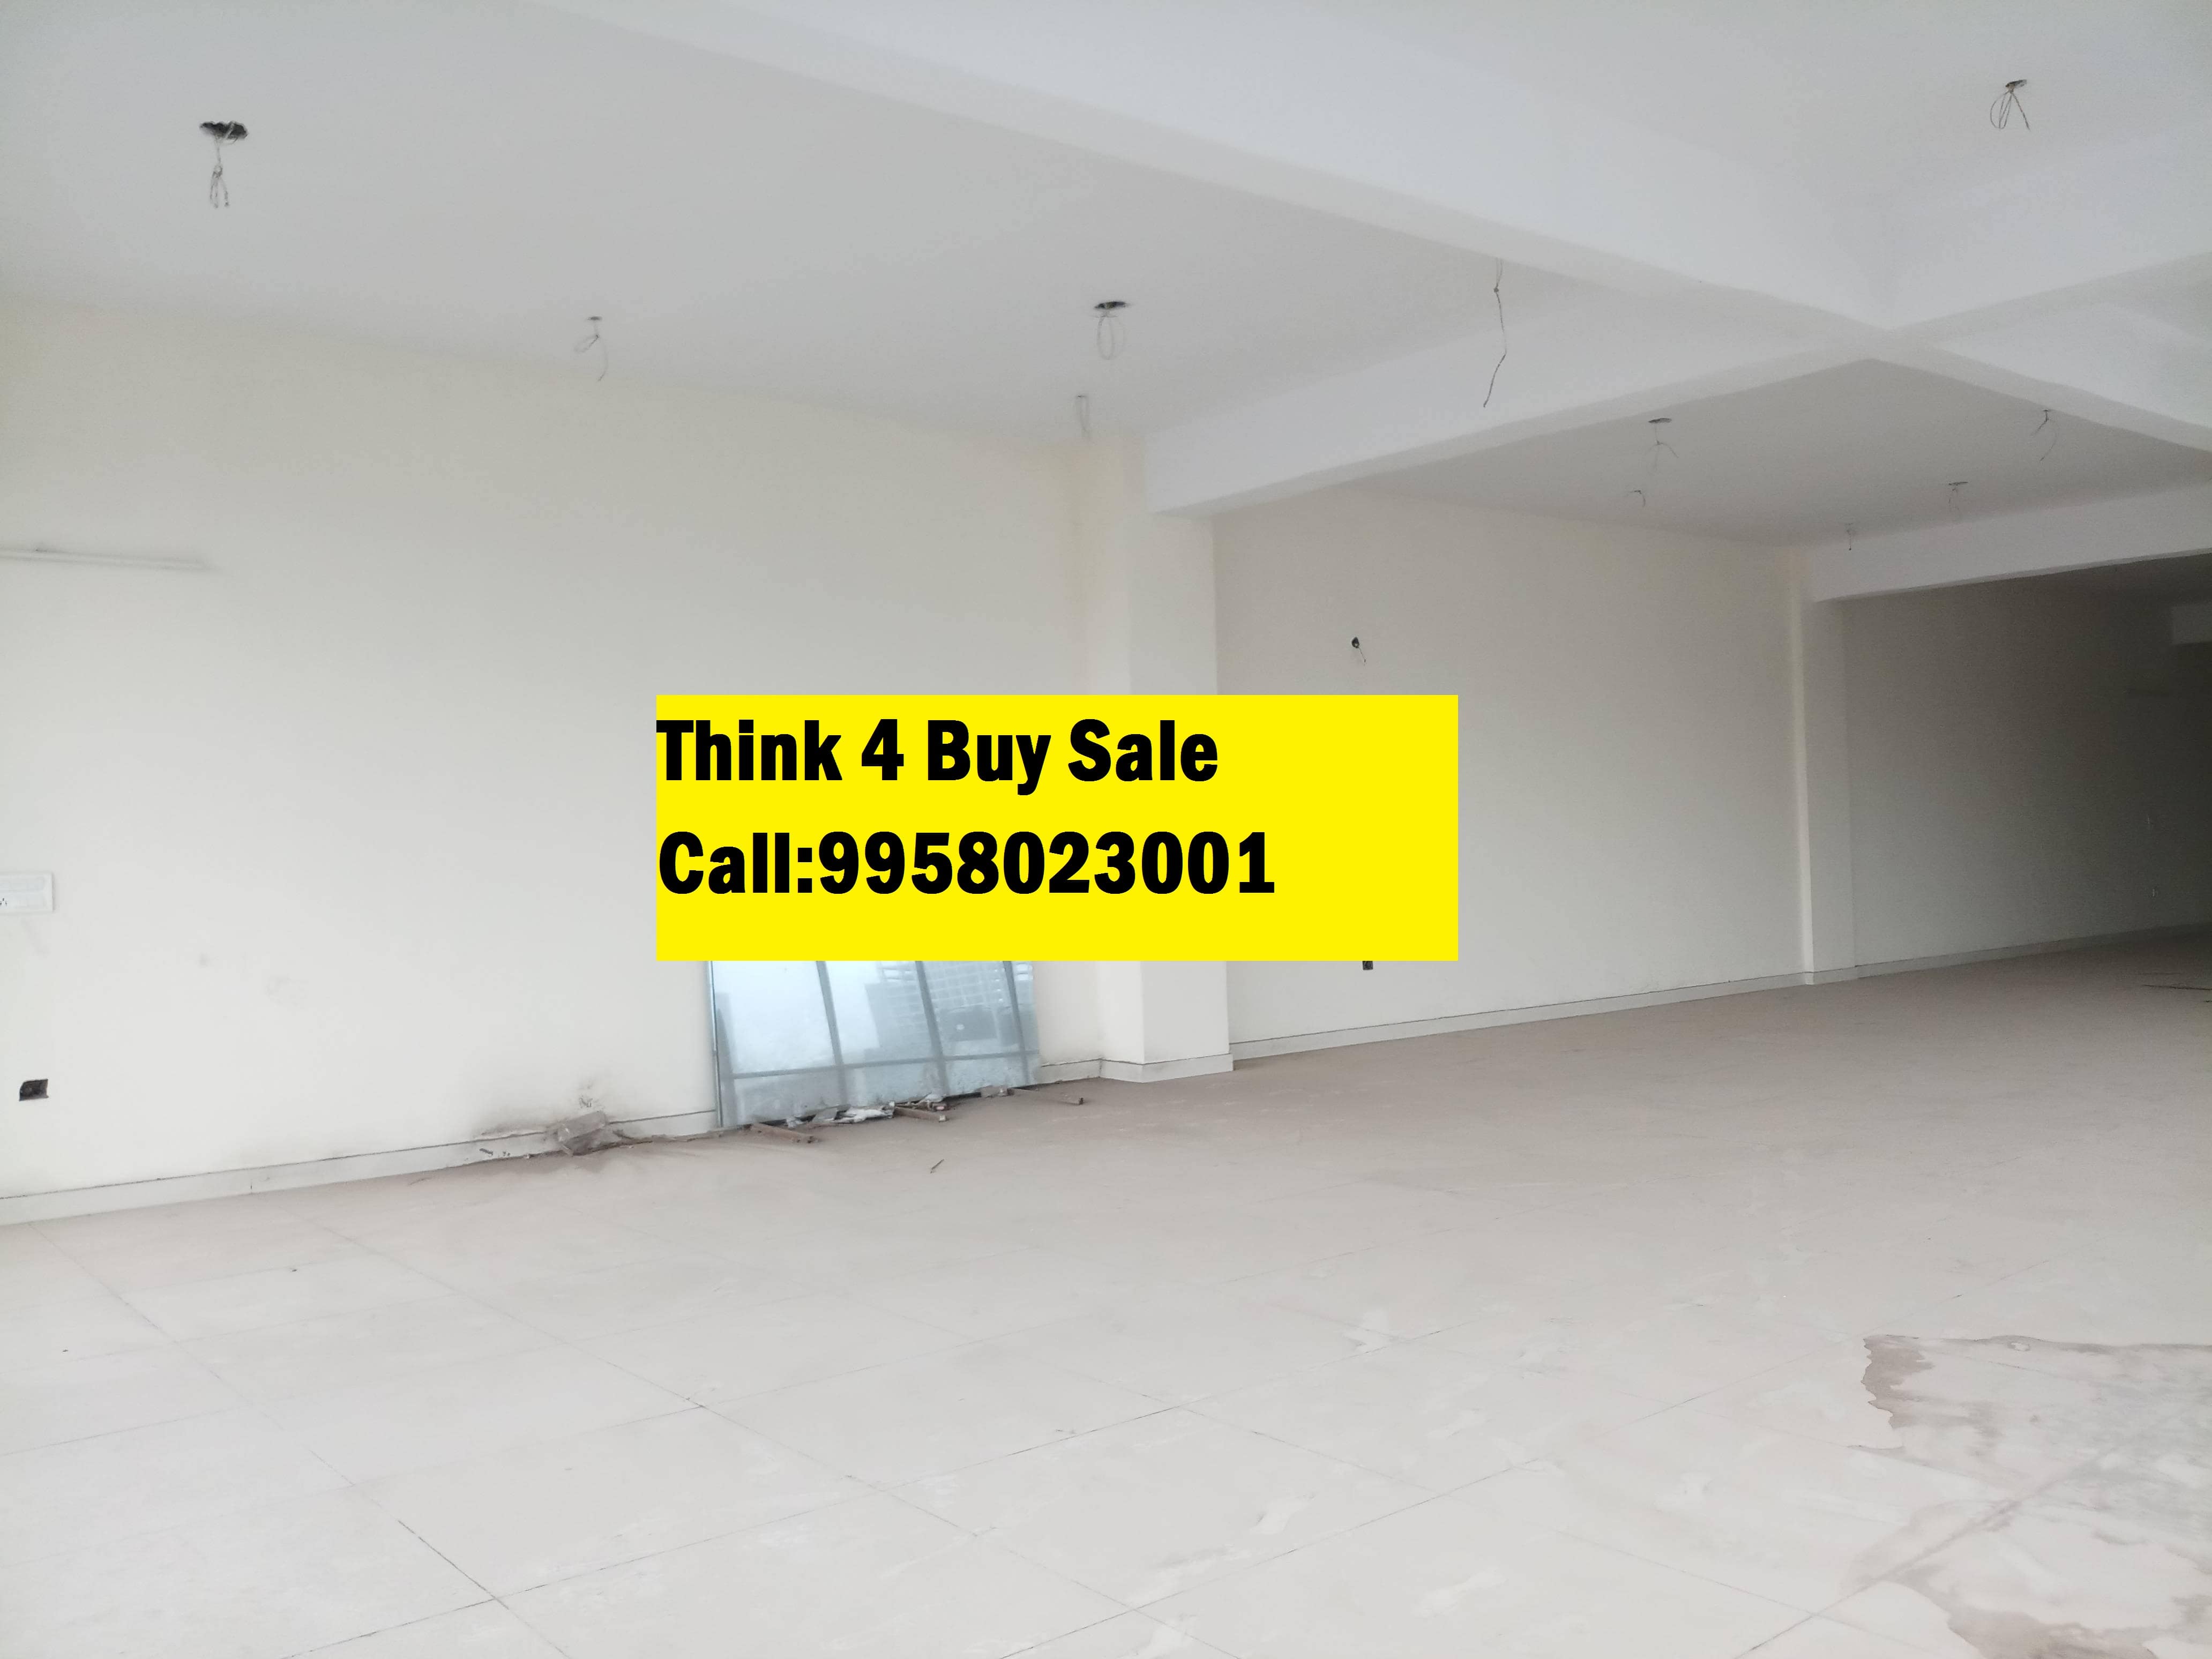 Factory for Rent in Patparganj  Industrial Area